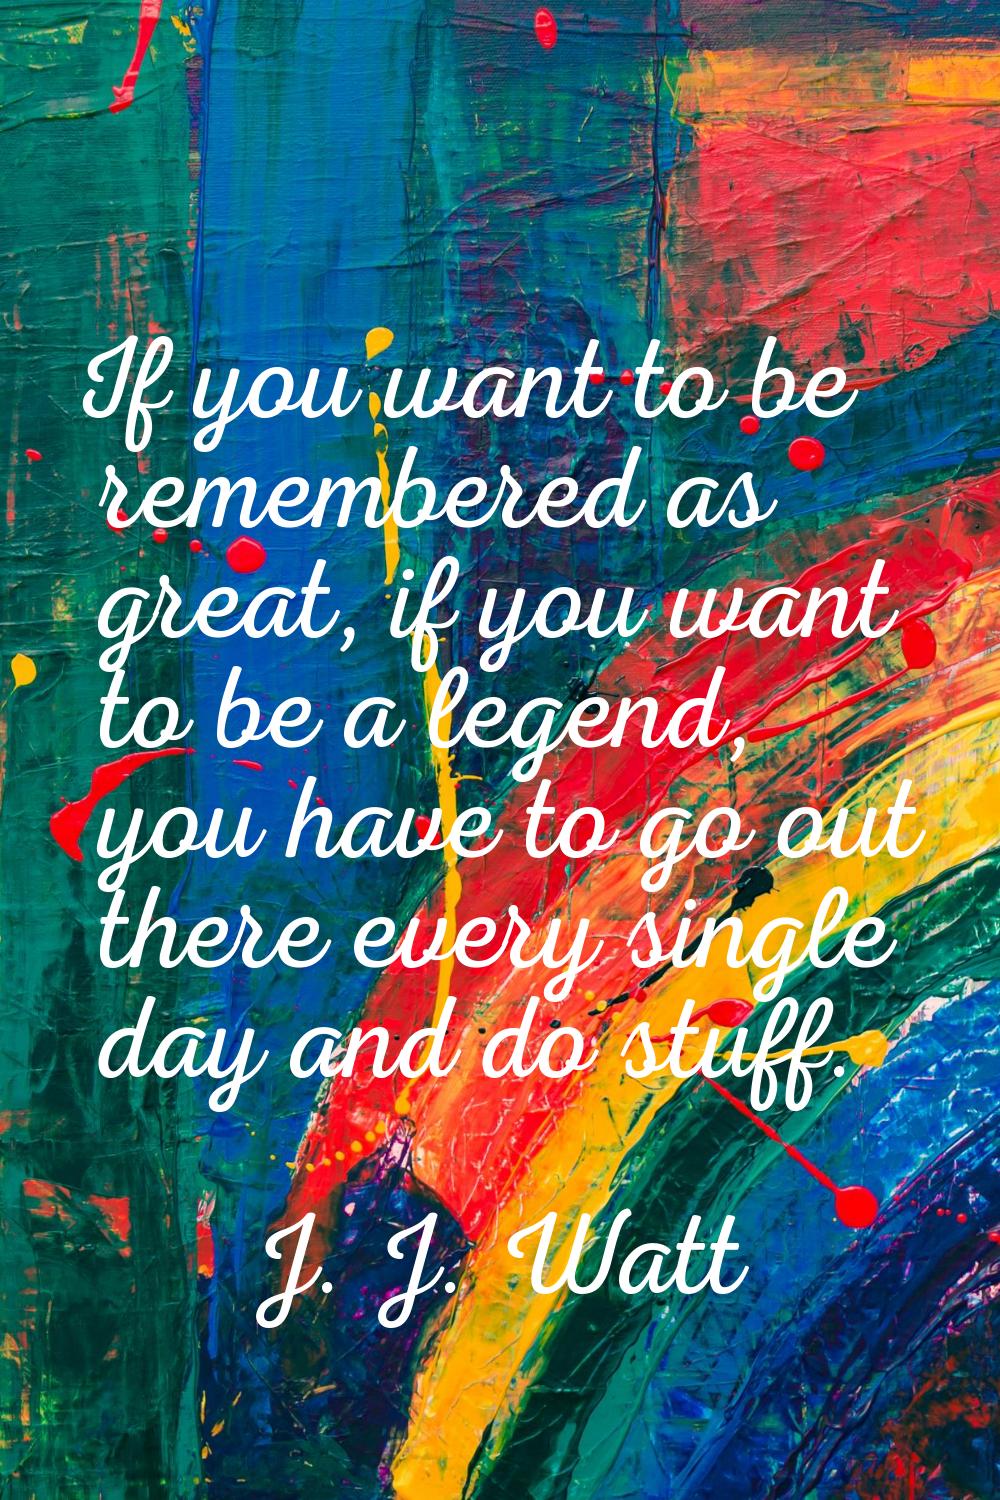 If you want to be remembered as great, if you want to be a legend, you have to go out there every s